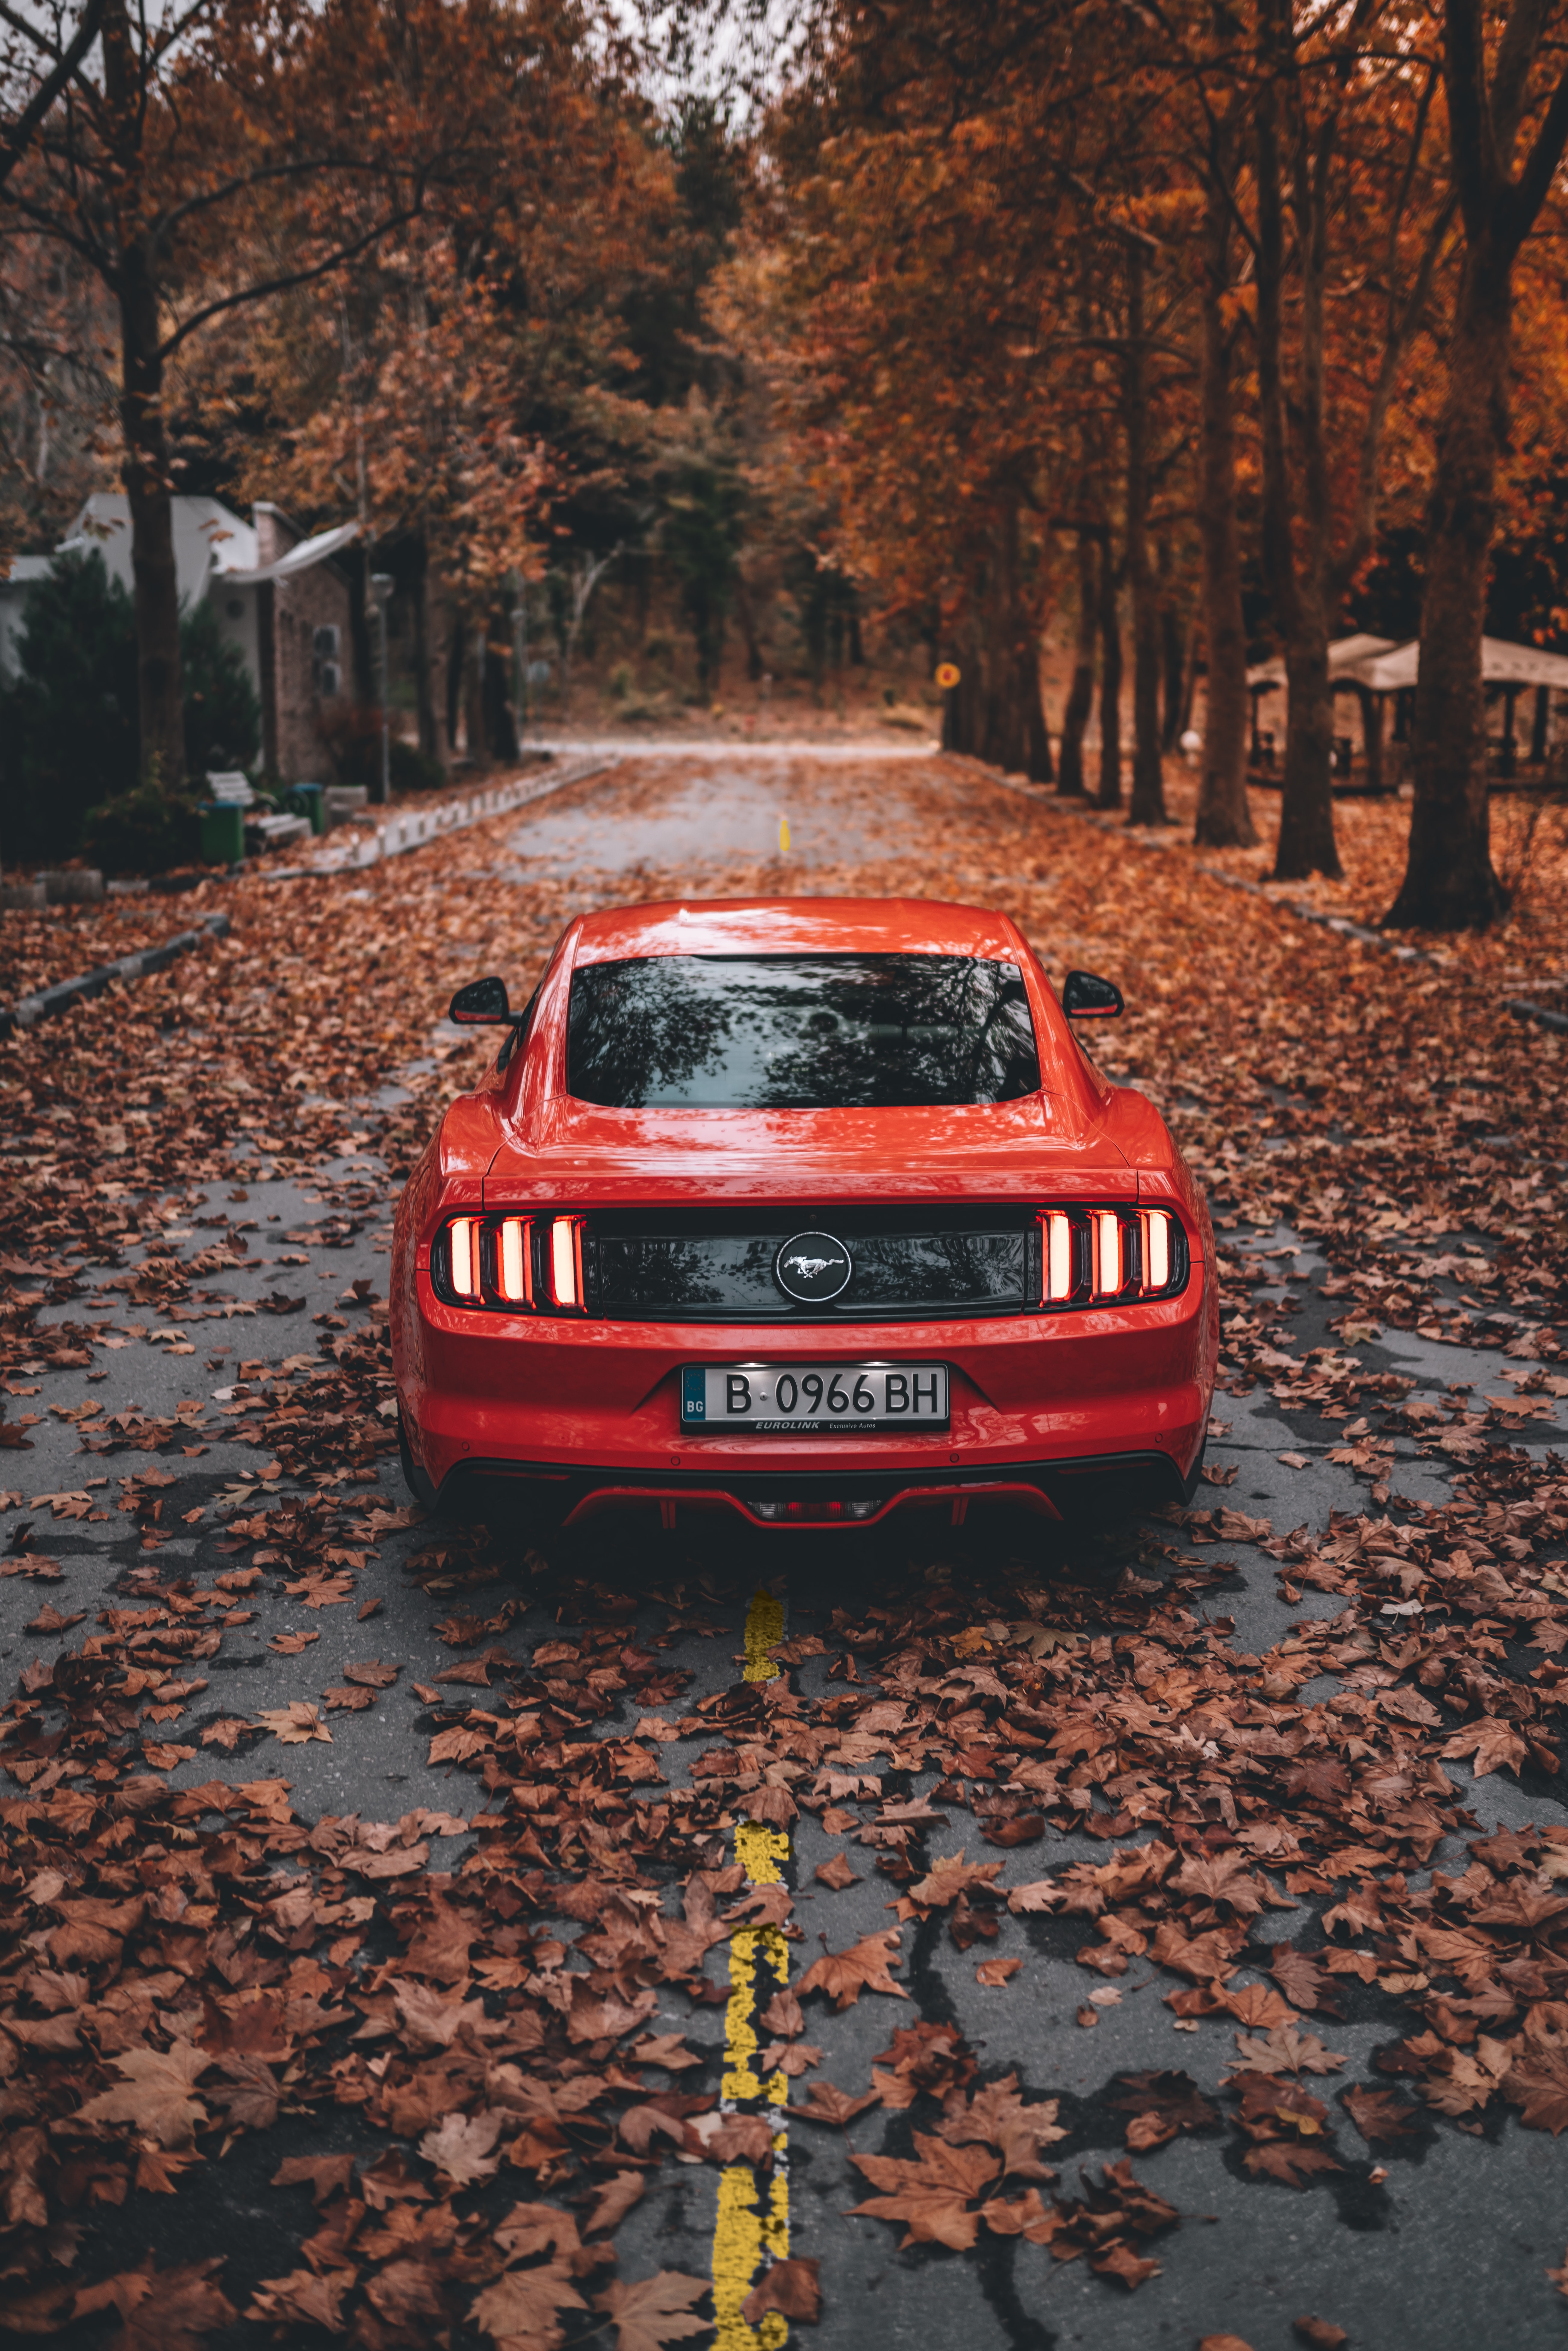 Popular Ford Mustang Image for Phone